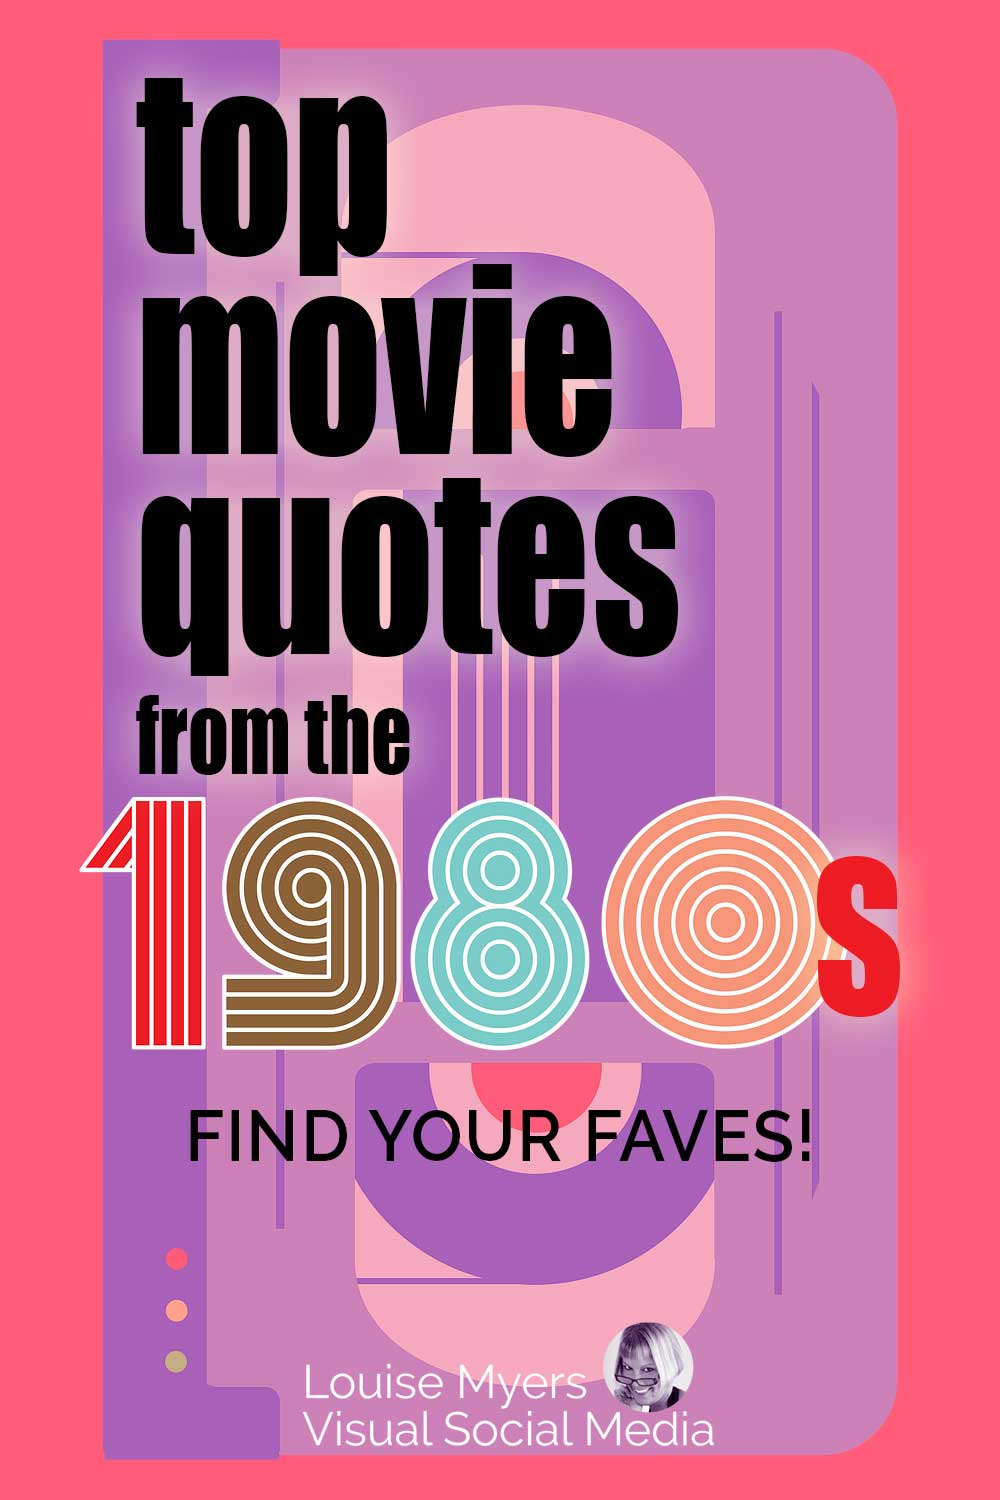 purple and pink graphic of vhs movie tape says top movie quote from the 80s, find your faves.